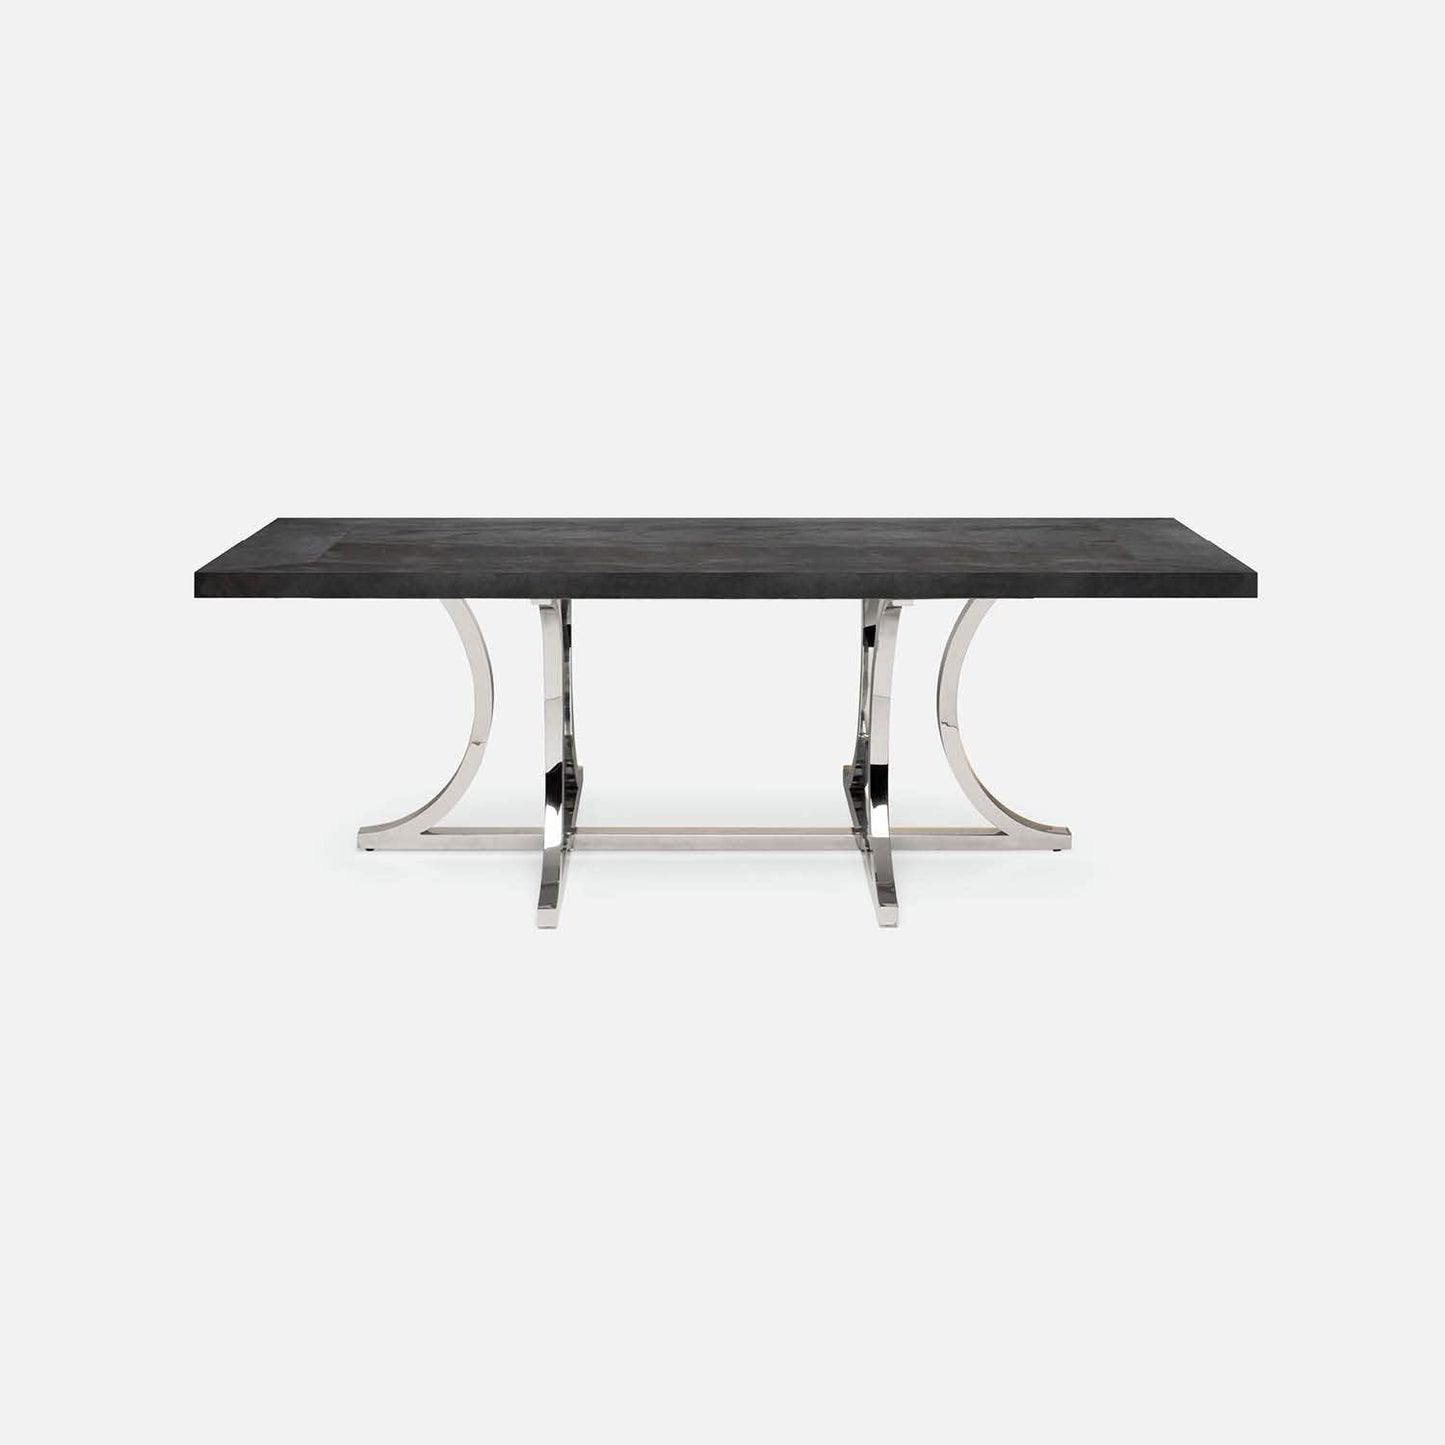 Made Goods Leighton 72" x 40" x 30" Polished Silver Steel Dinning Table With Rectangle Zinc Metal Table Top